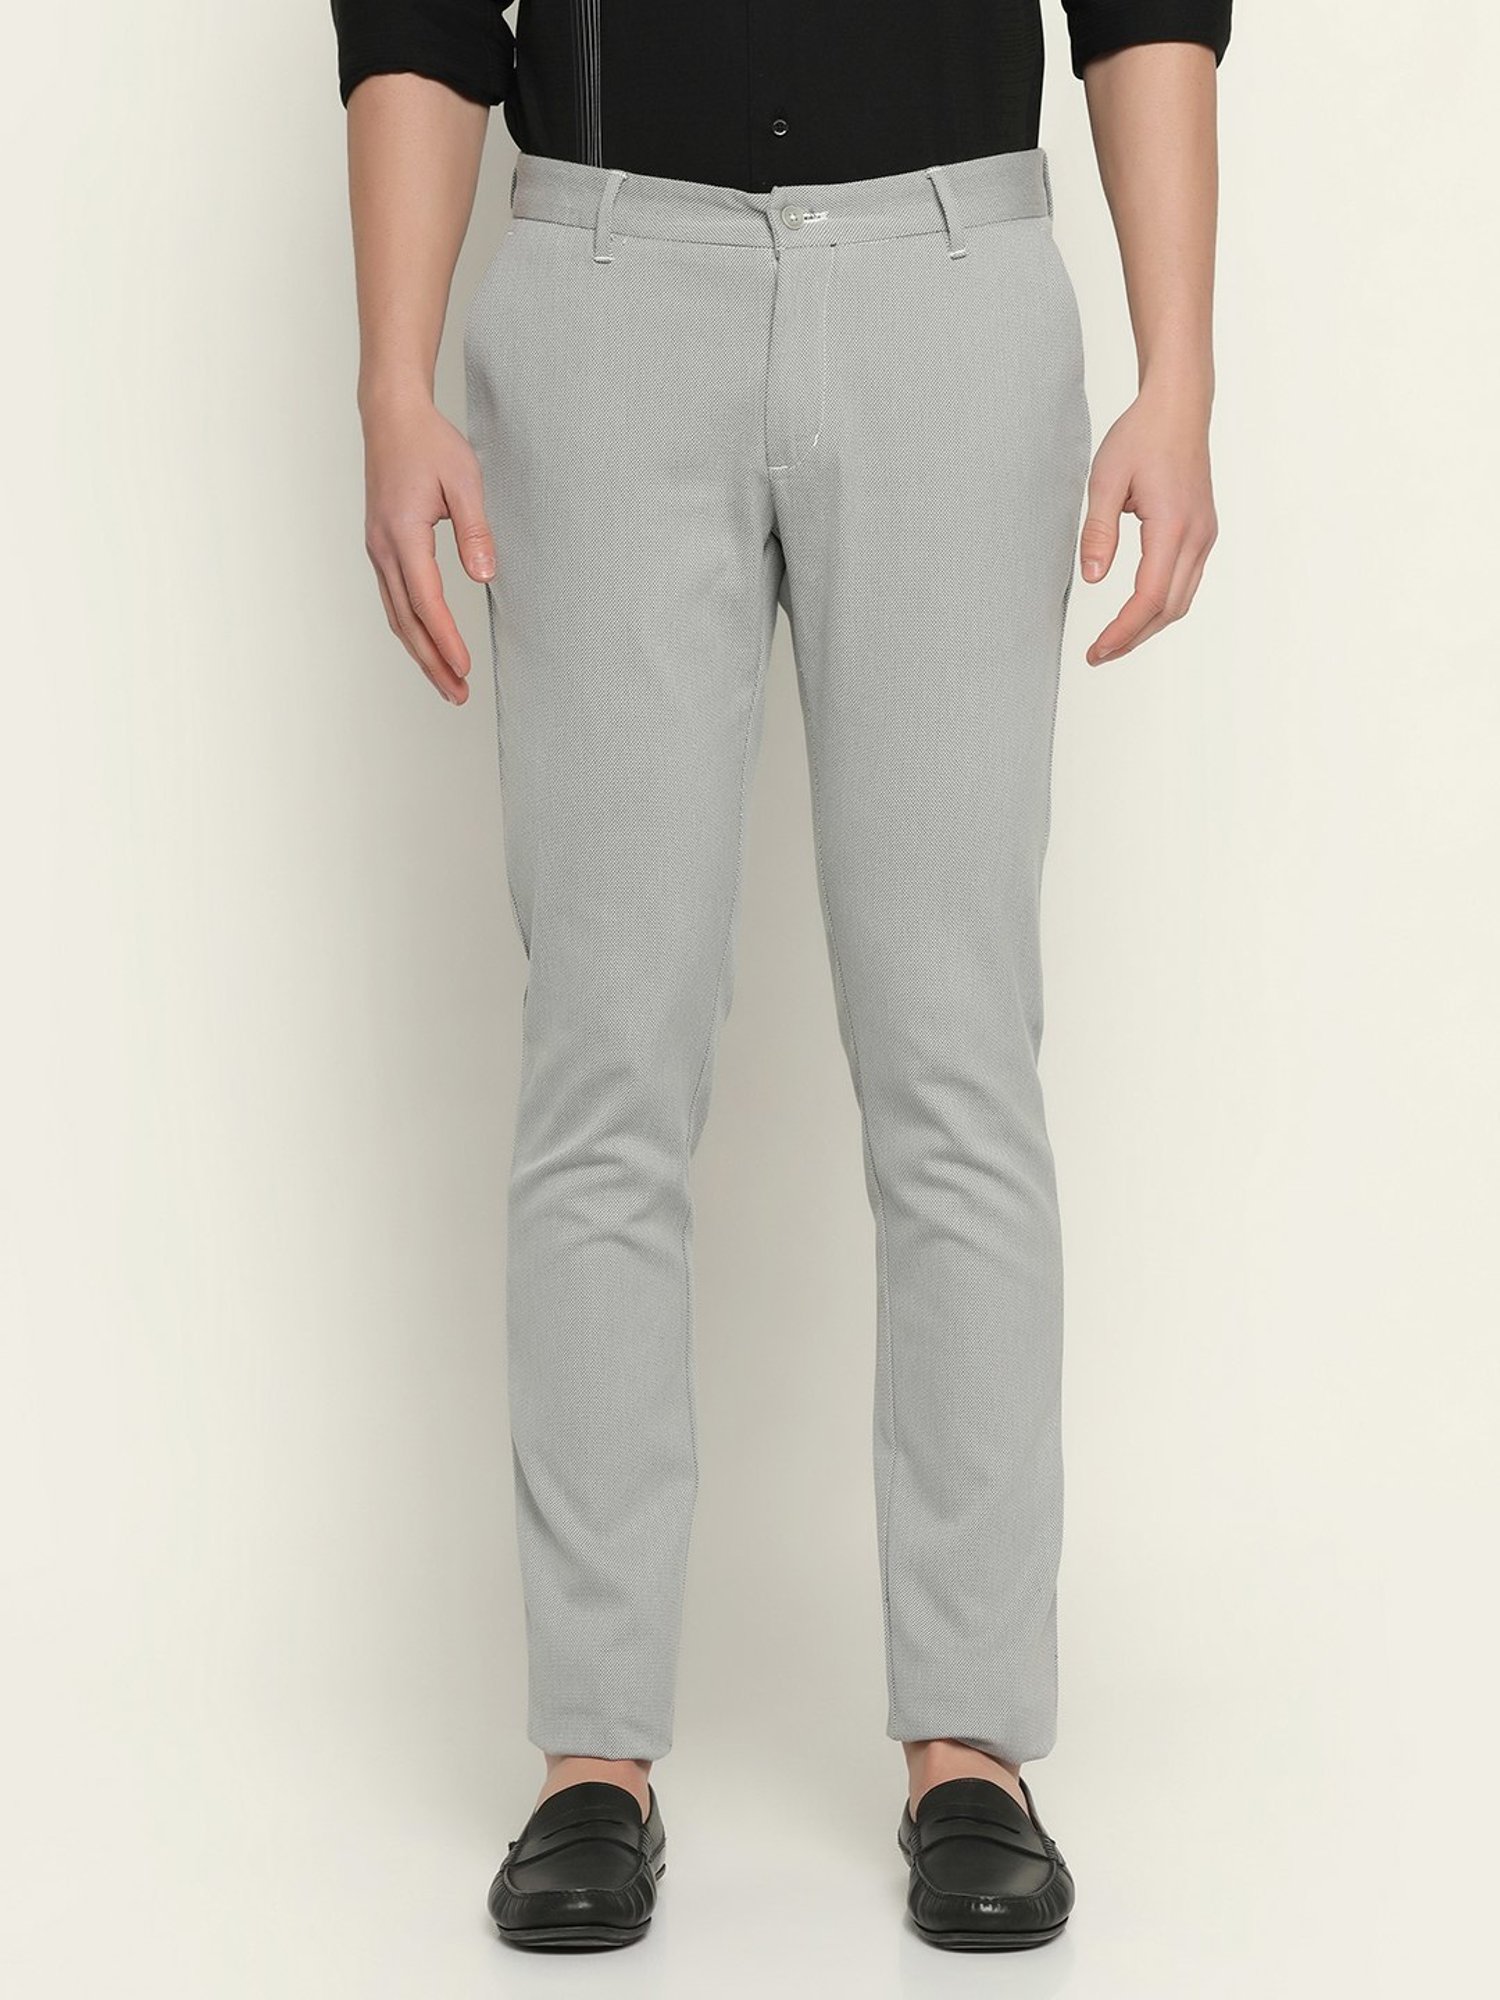 Buy Men Grey Solid Low Skinny Fit Casual Trousers Online  753495  Peter  England